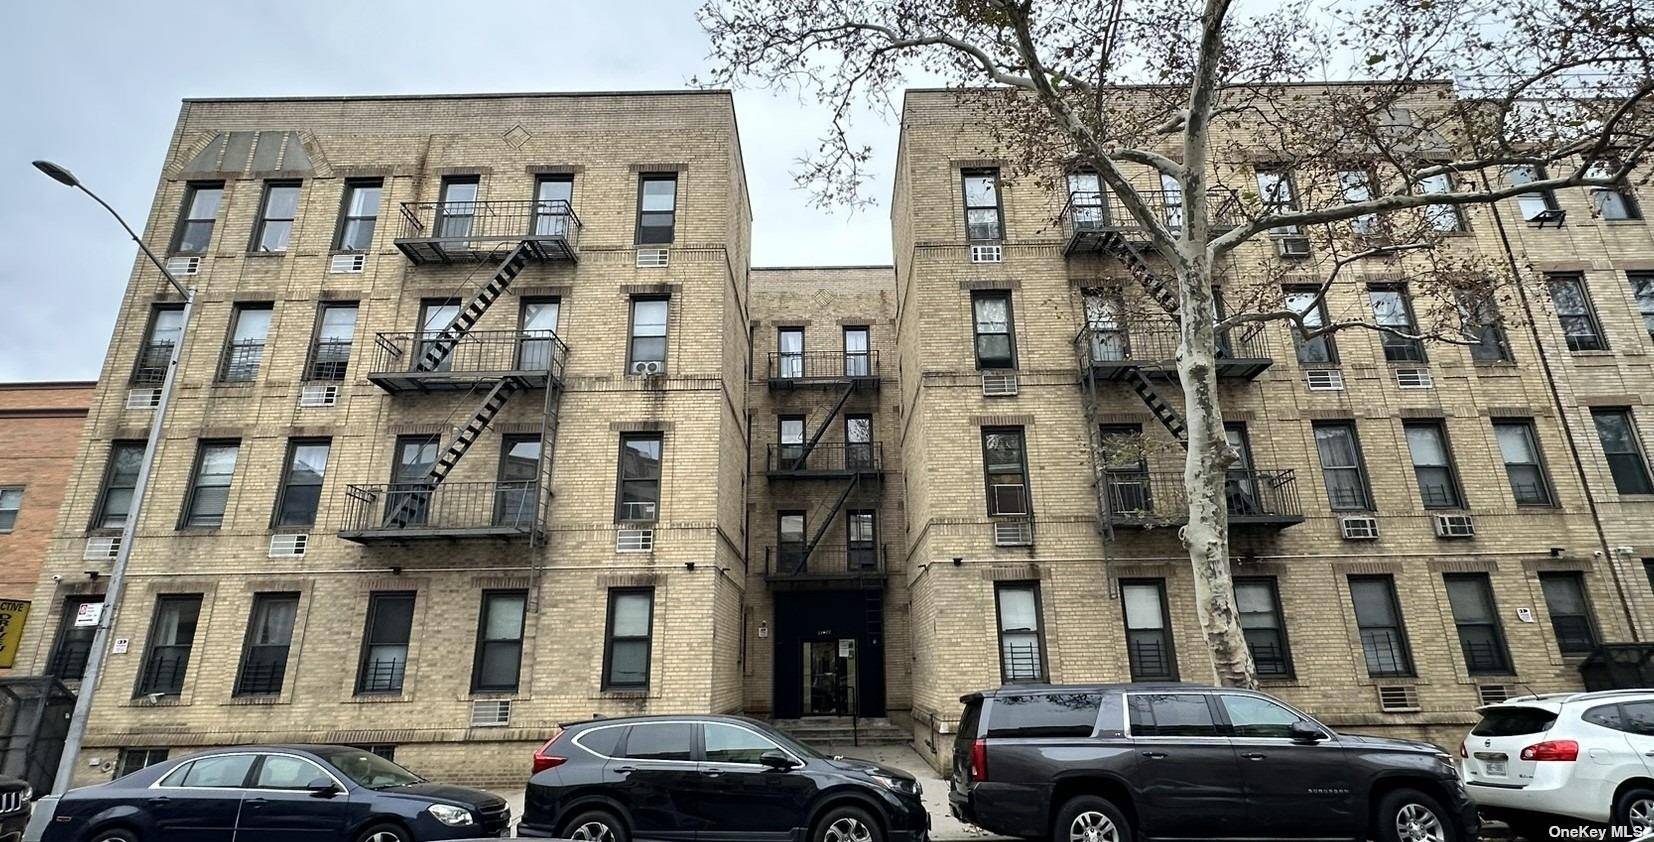 Rare find 35 unit multi family apartment building with 16 fair market units eleven 11 one bedroom and five 5 two bedroom and 19 rent stabilized units sixteen 16 one ...